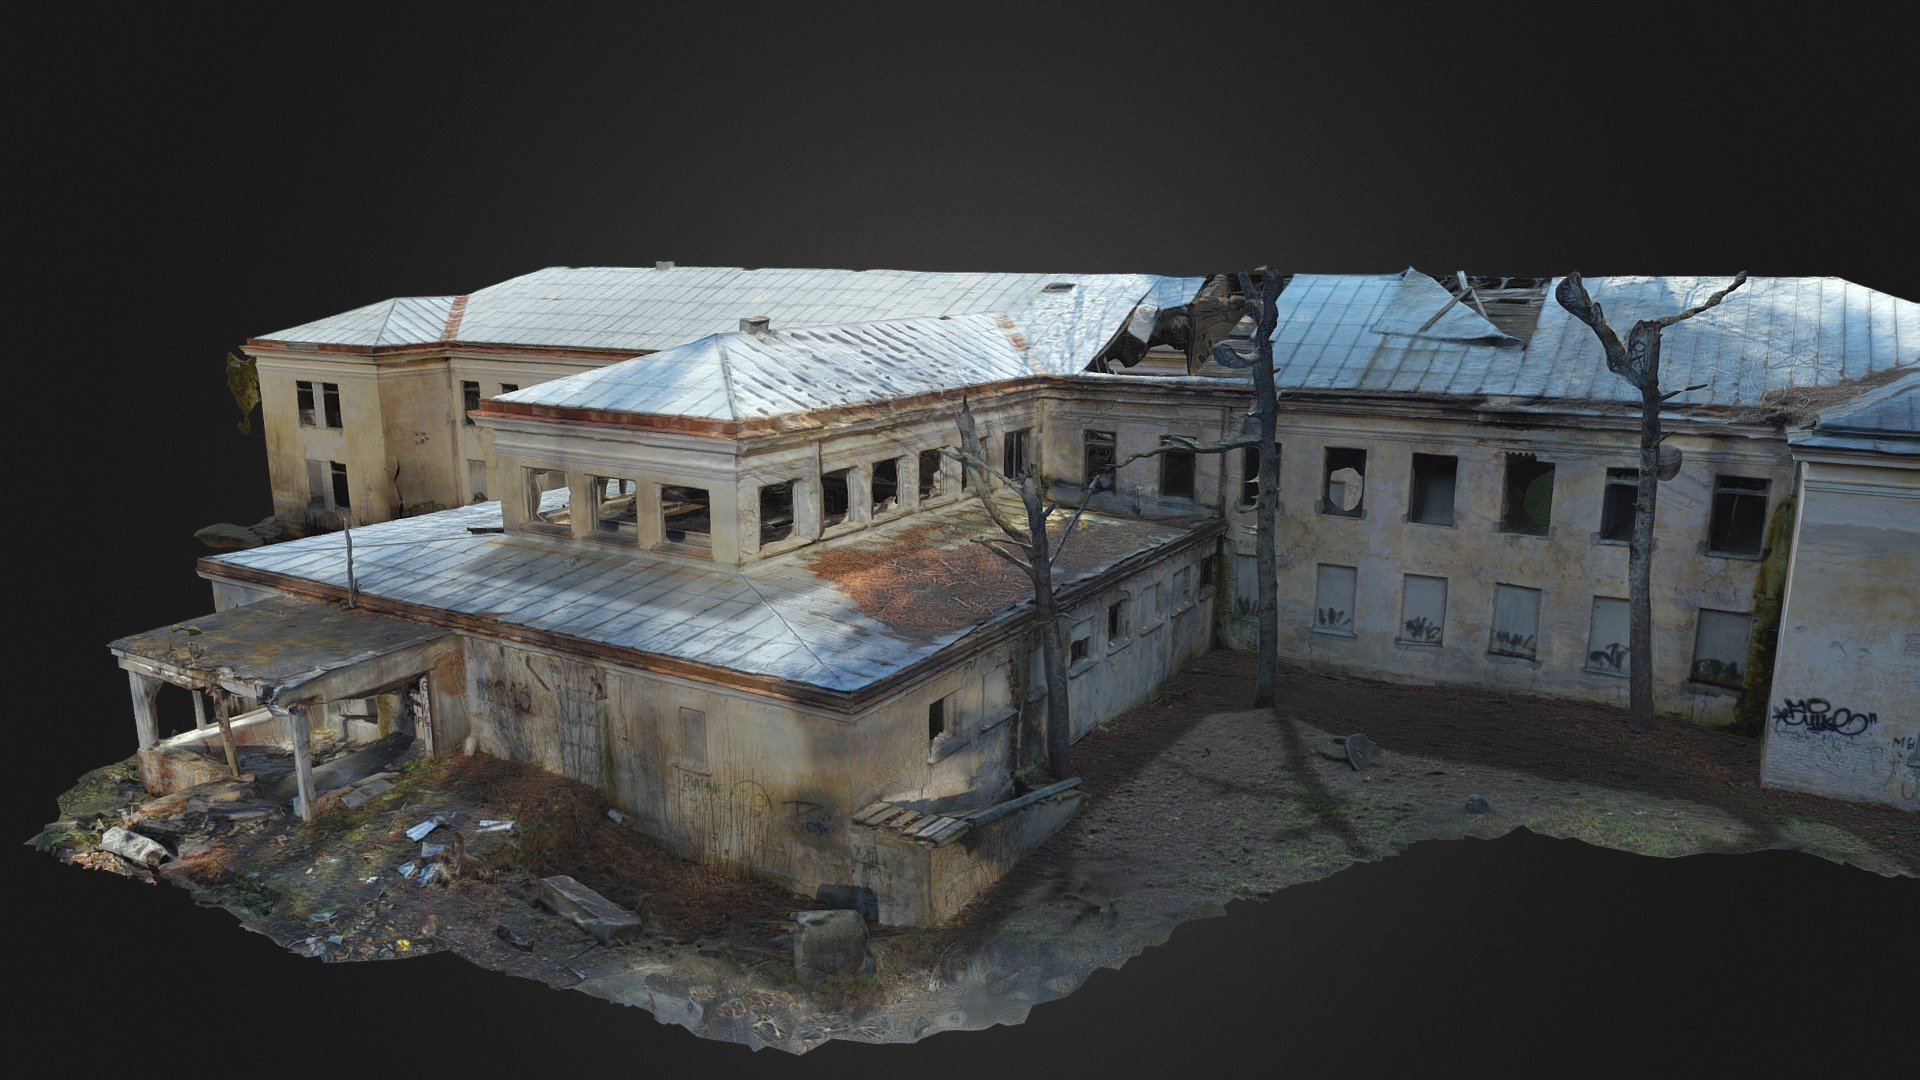 3D scan of an abandoned manor with broken windows, some boarded up, broken roof, broken walls.
Entrance has been destroyed.
Witn normal map 3d model